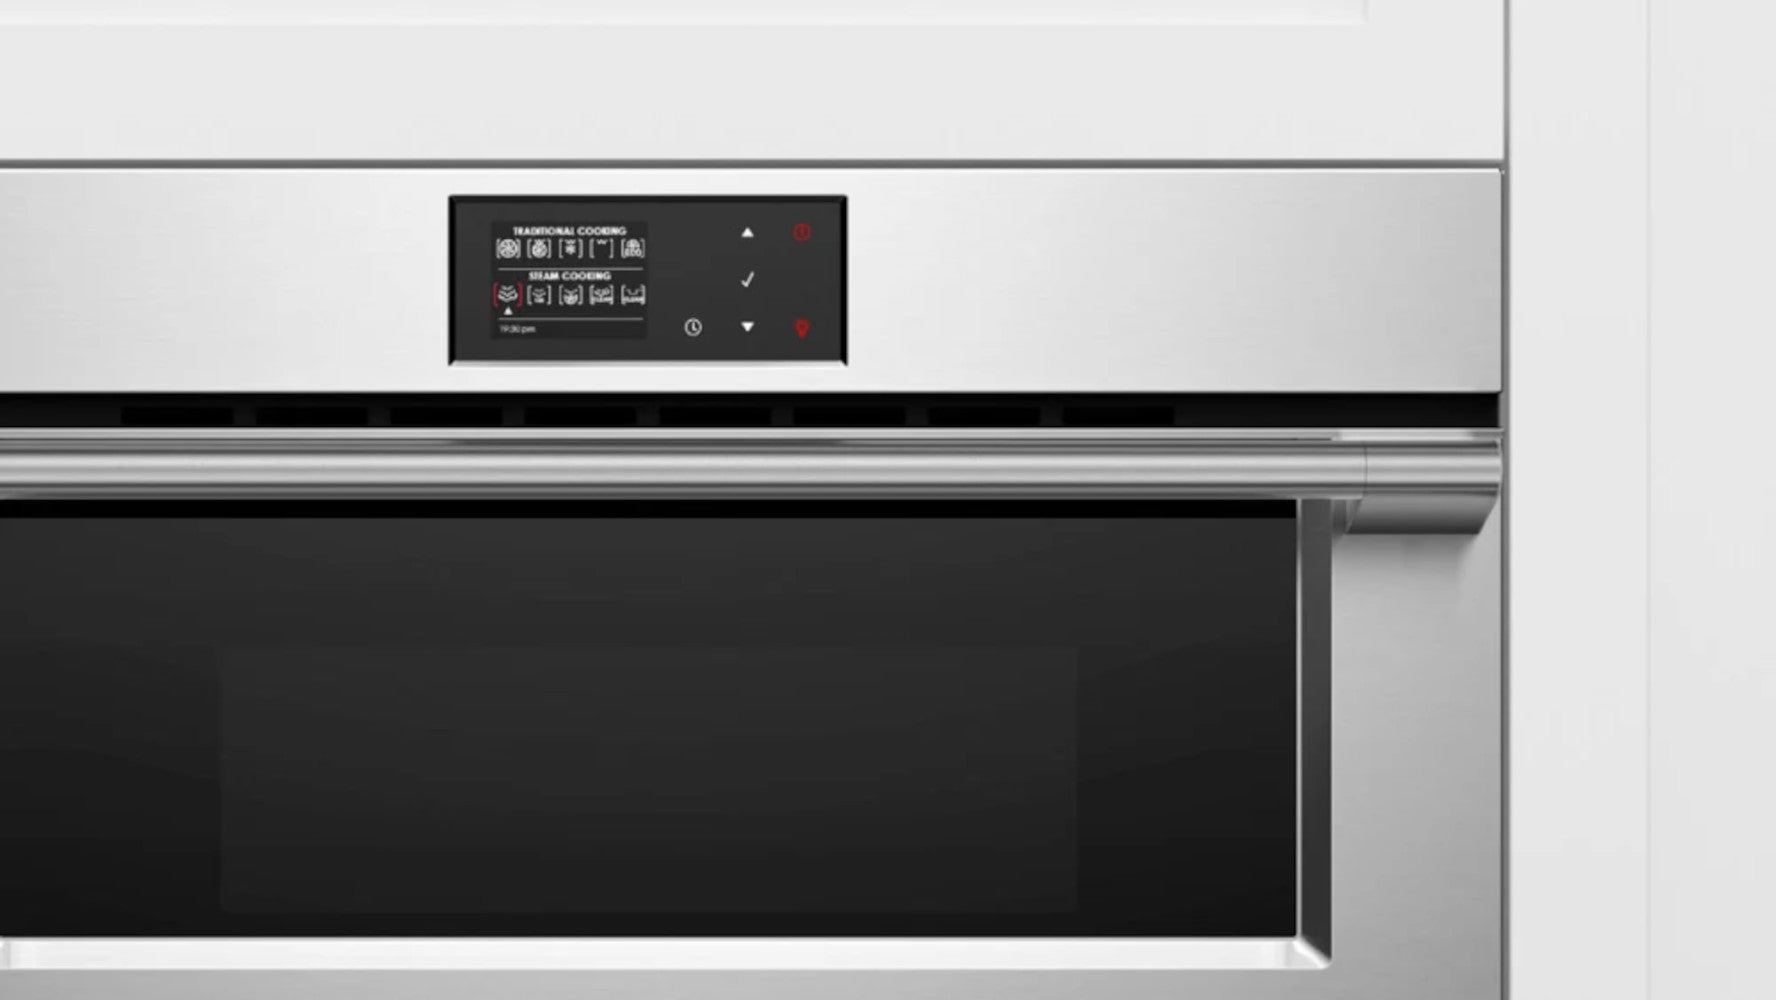 Fisher & Paykel - 1.3 cu. ft Steam Wall Oven in Stainless - OS30NPX1